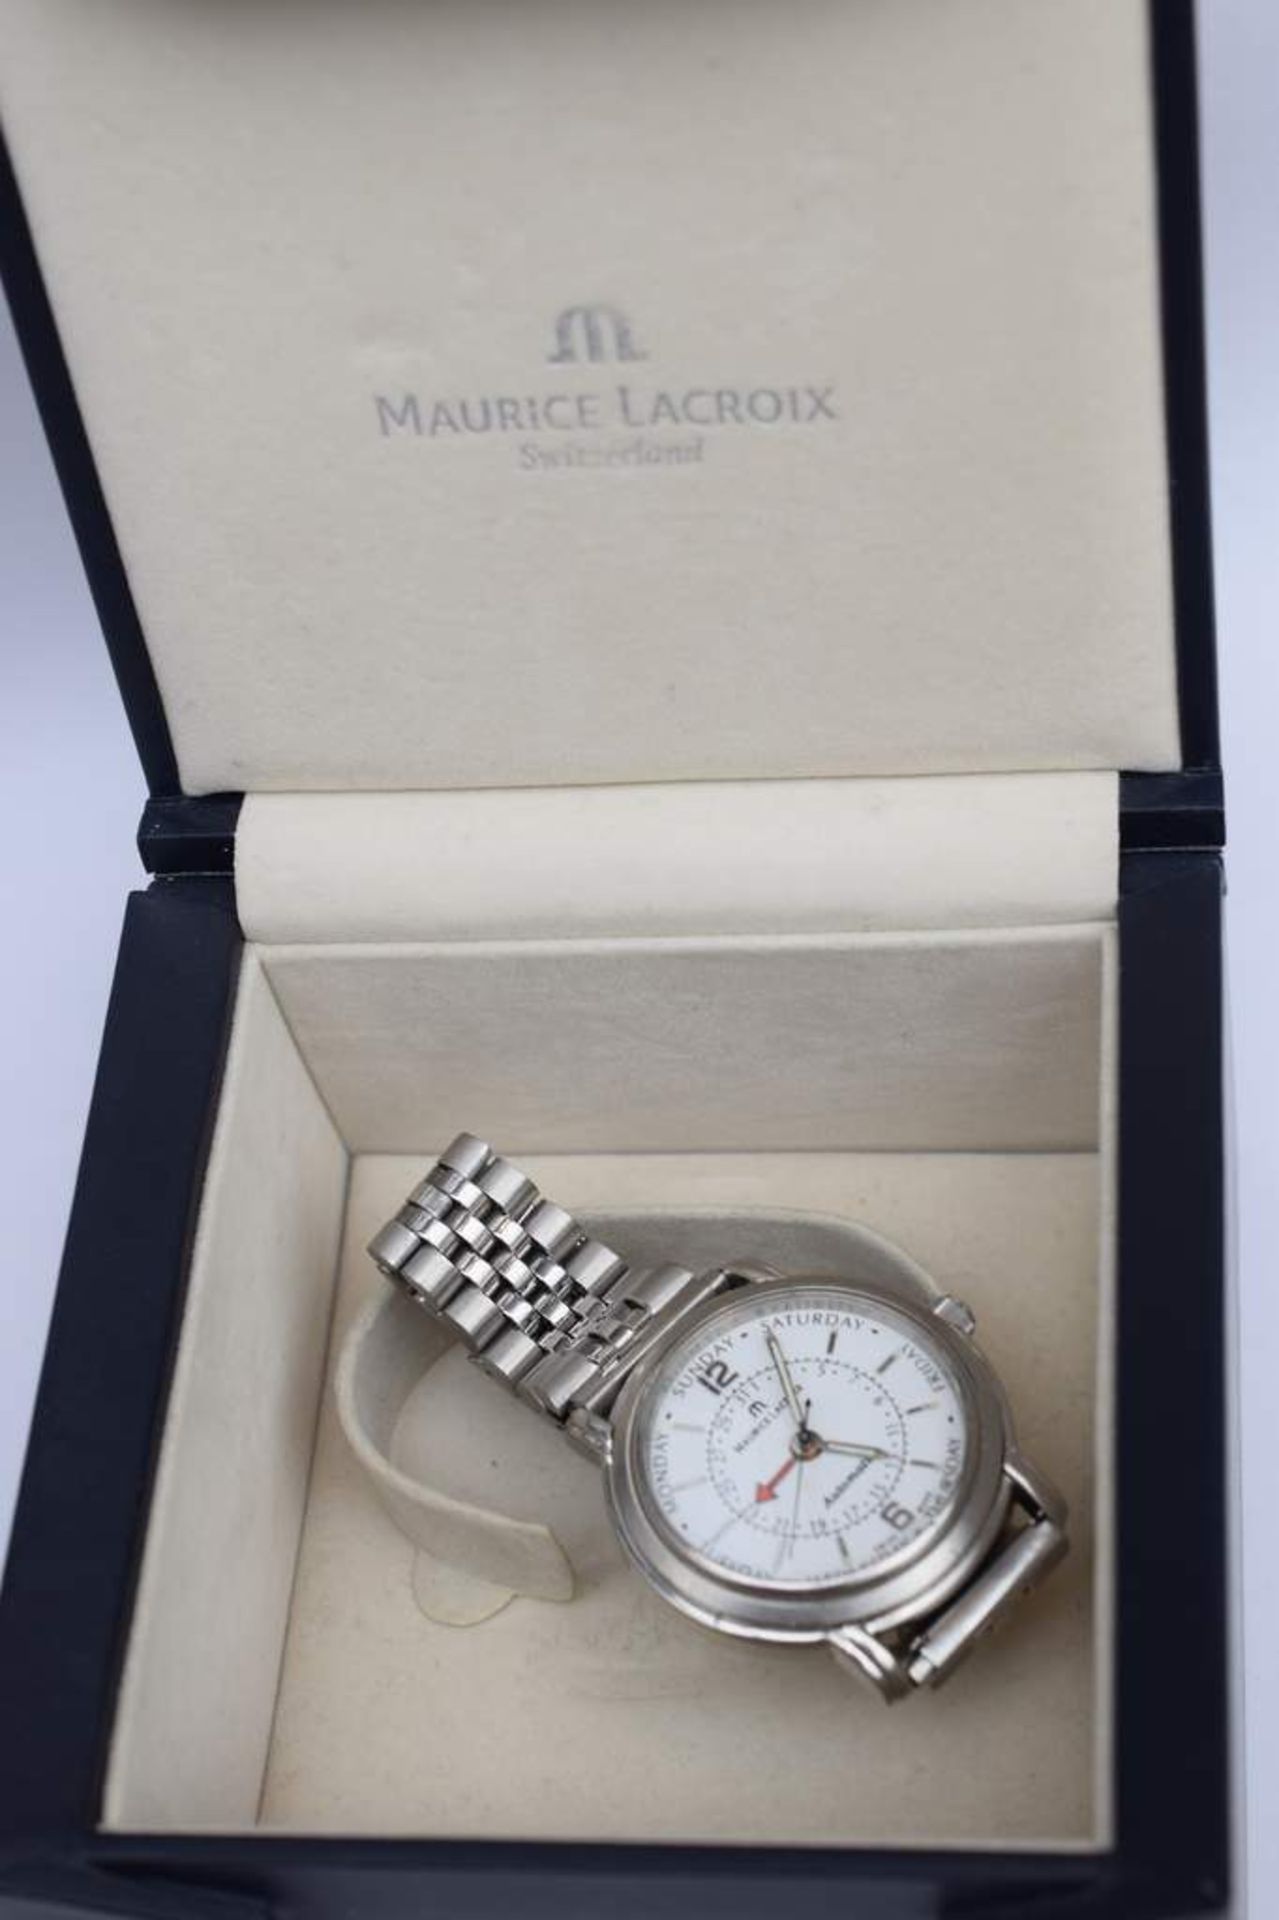 Maurice Lacroix Masterpiece Chronograph - Image 2 of 4